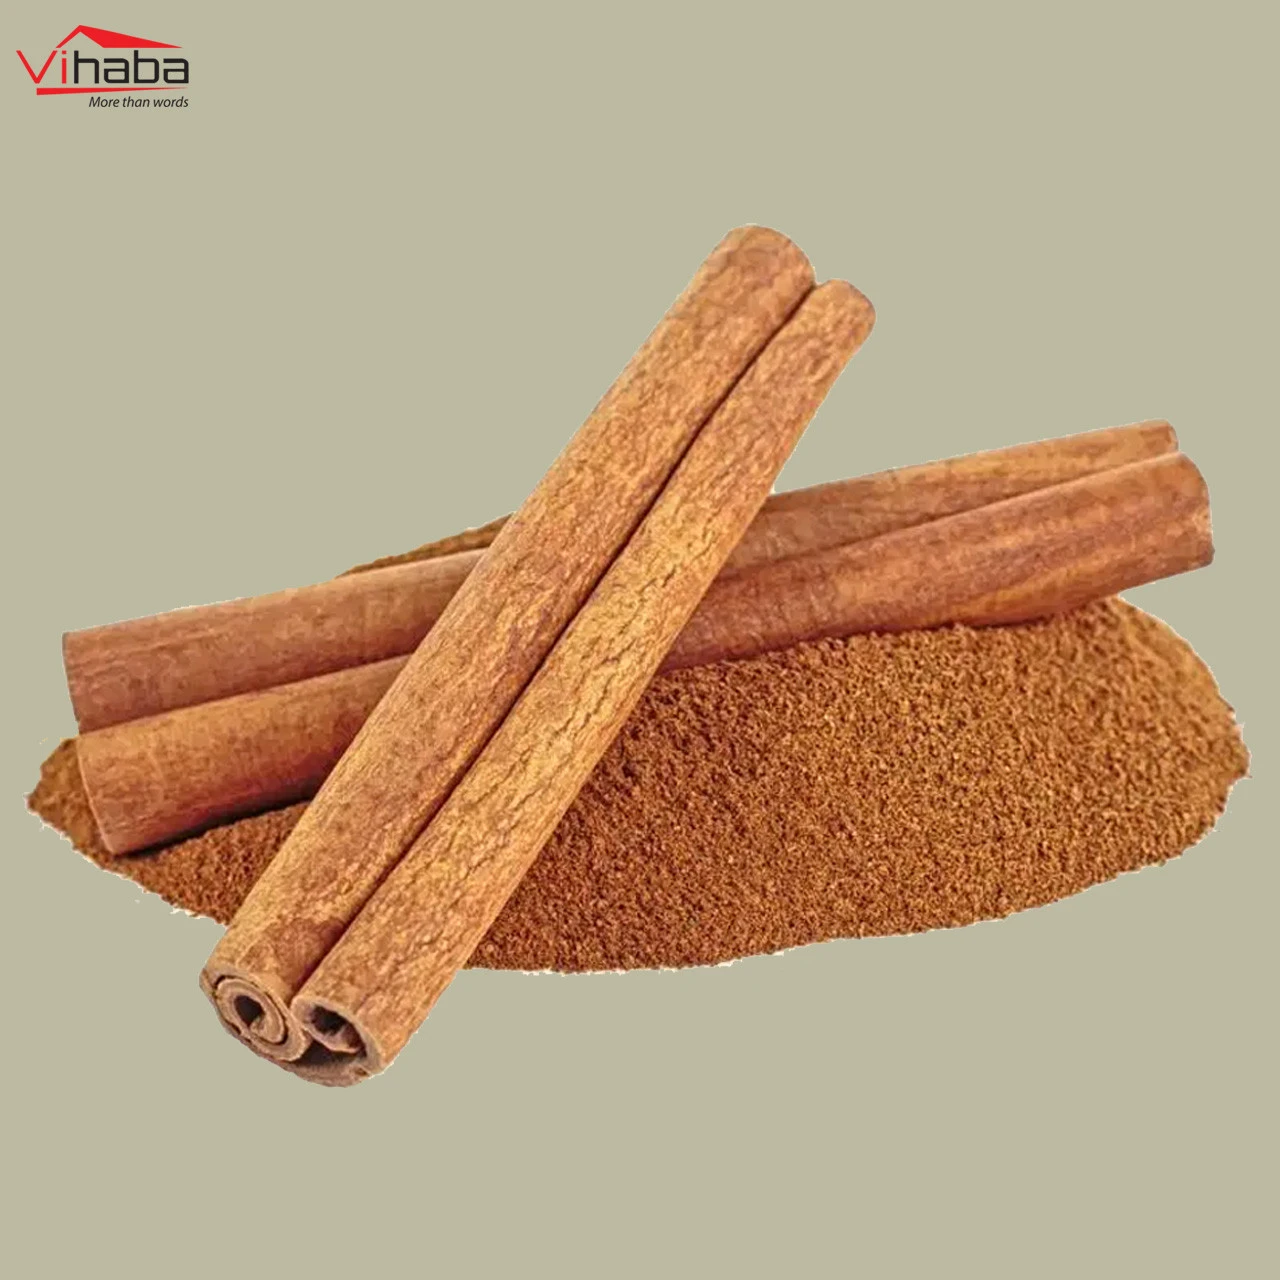 Manufacture Products Dried Dehydrated Nutrition Supplement Spices and Seasonings Cassia Single Herbs & Spices Raw Stick